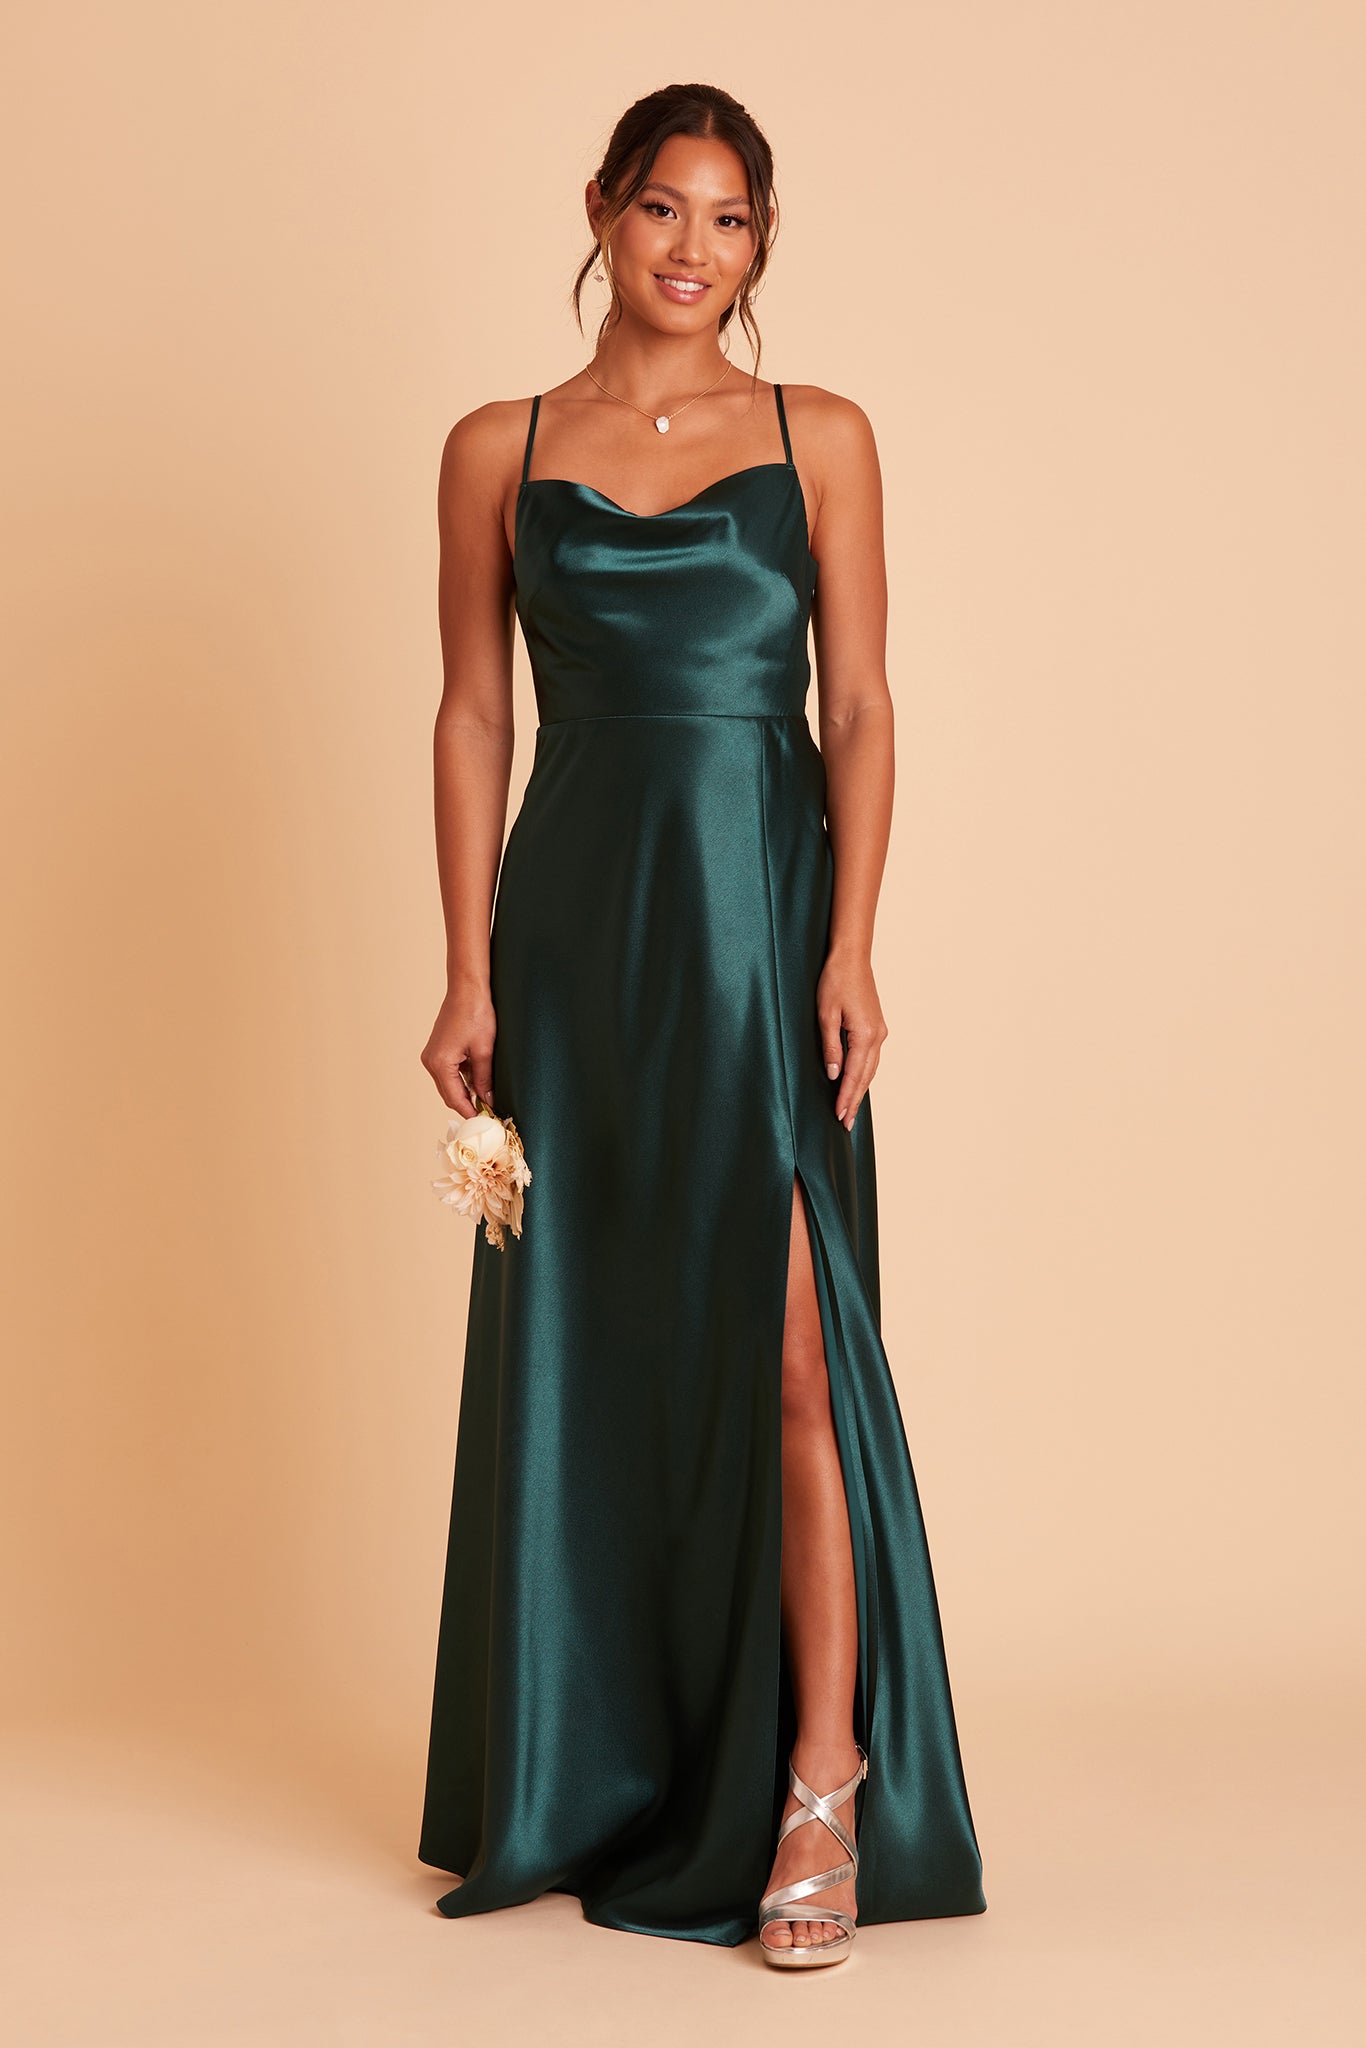 Front view of the Lisa Long Dress in emerald satin shows a slender model with a medium skin tone wearing a lightly draped cowl neck bodice with spaghetti straps and a floor-length flared dress with a slit. 